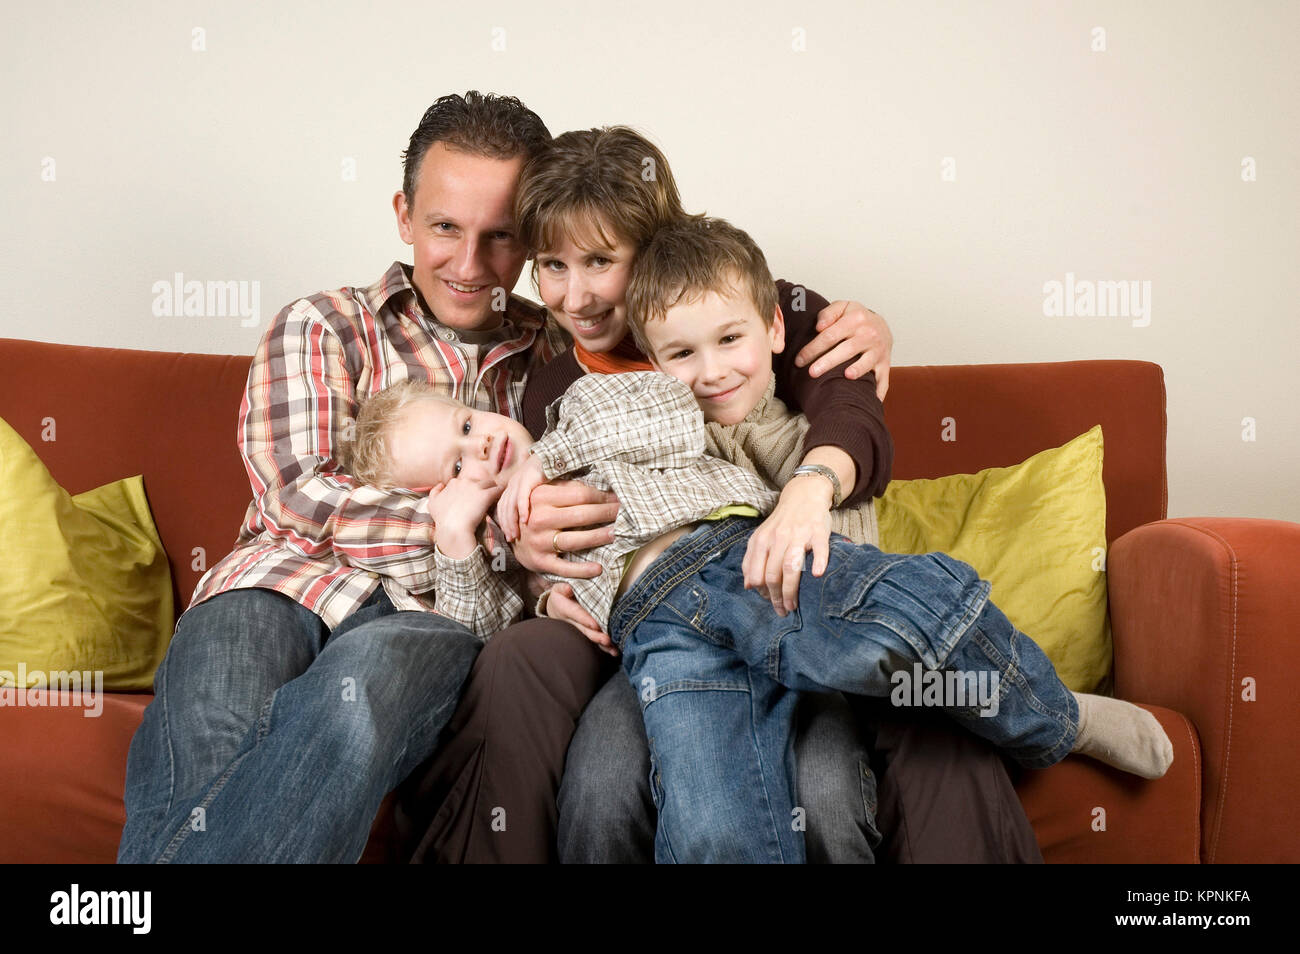 Family On A Couch 3 Stock Photo